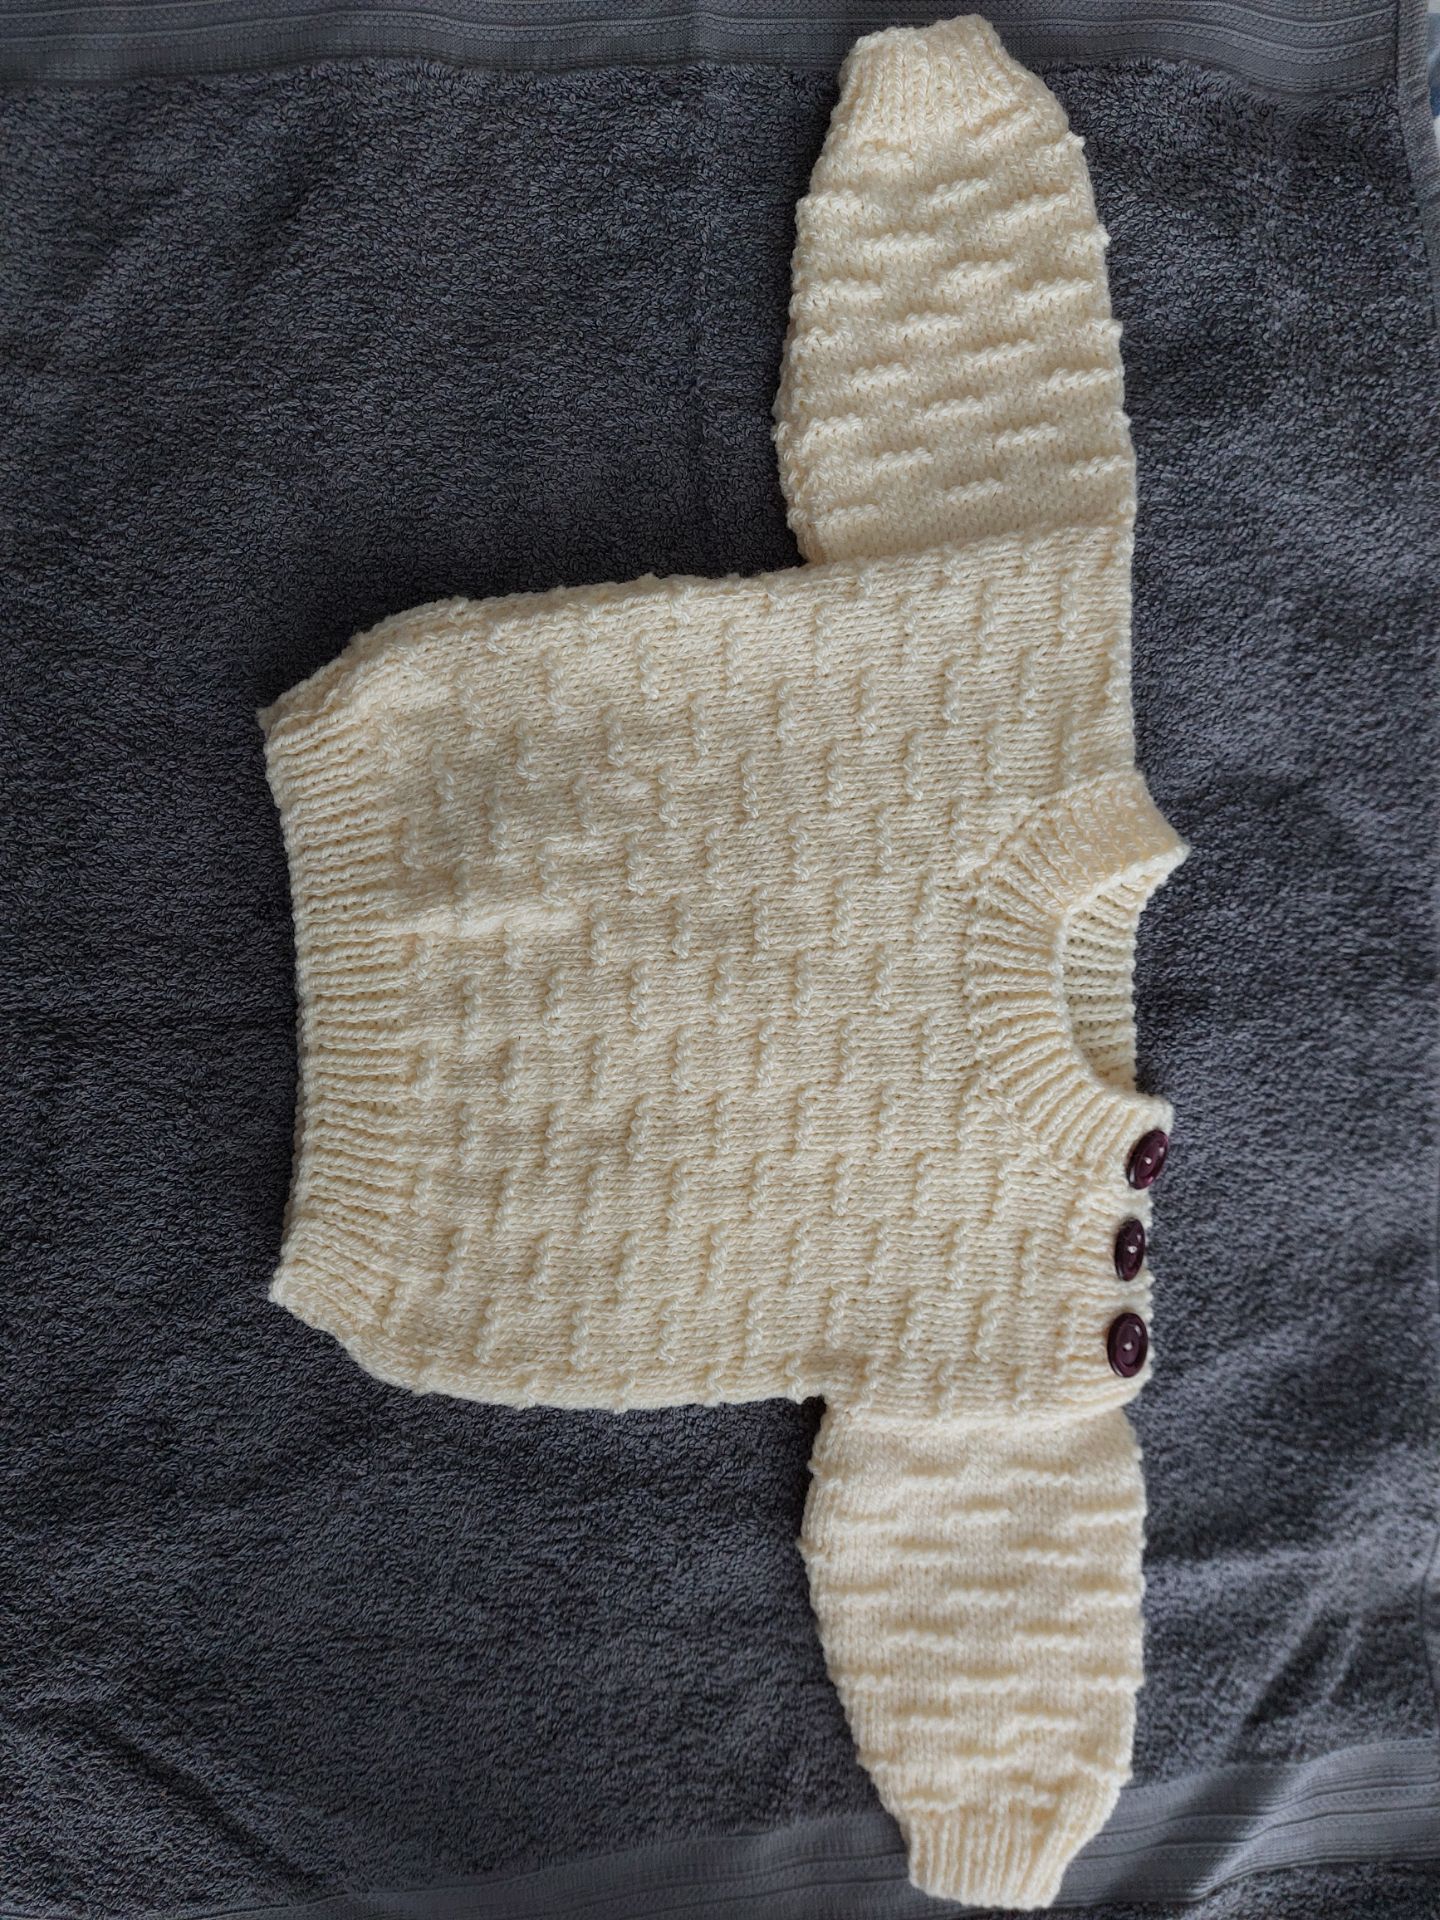 Hand Knitted Baby Jumper - Image 4 of 4